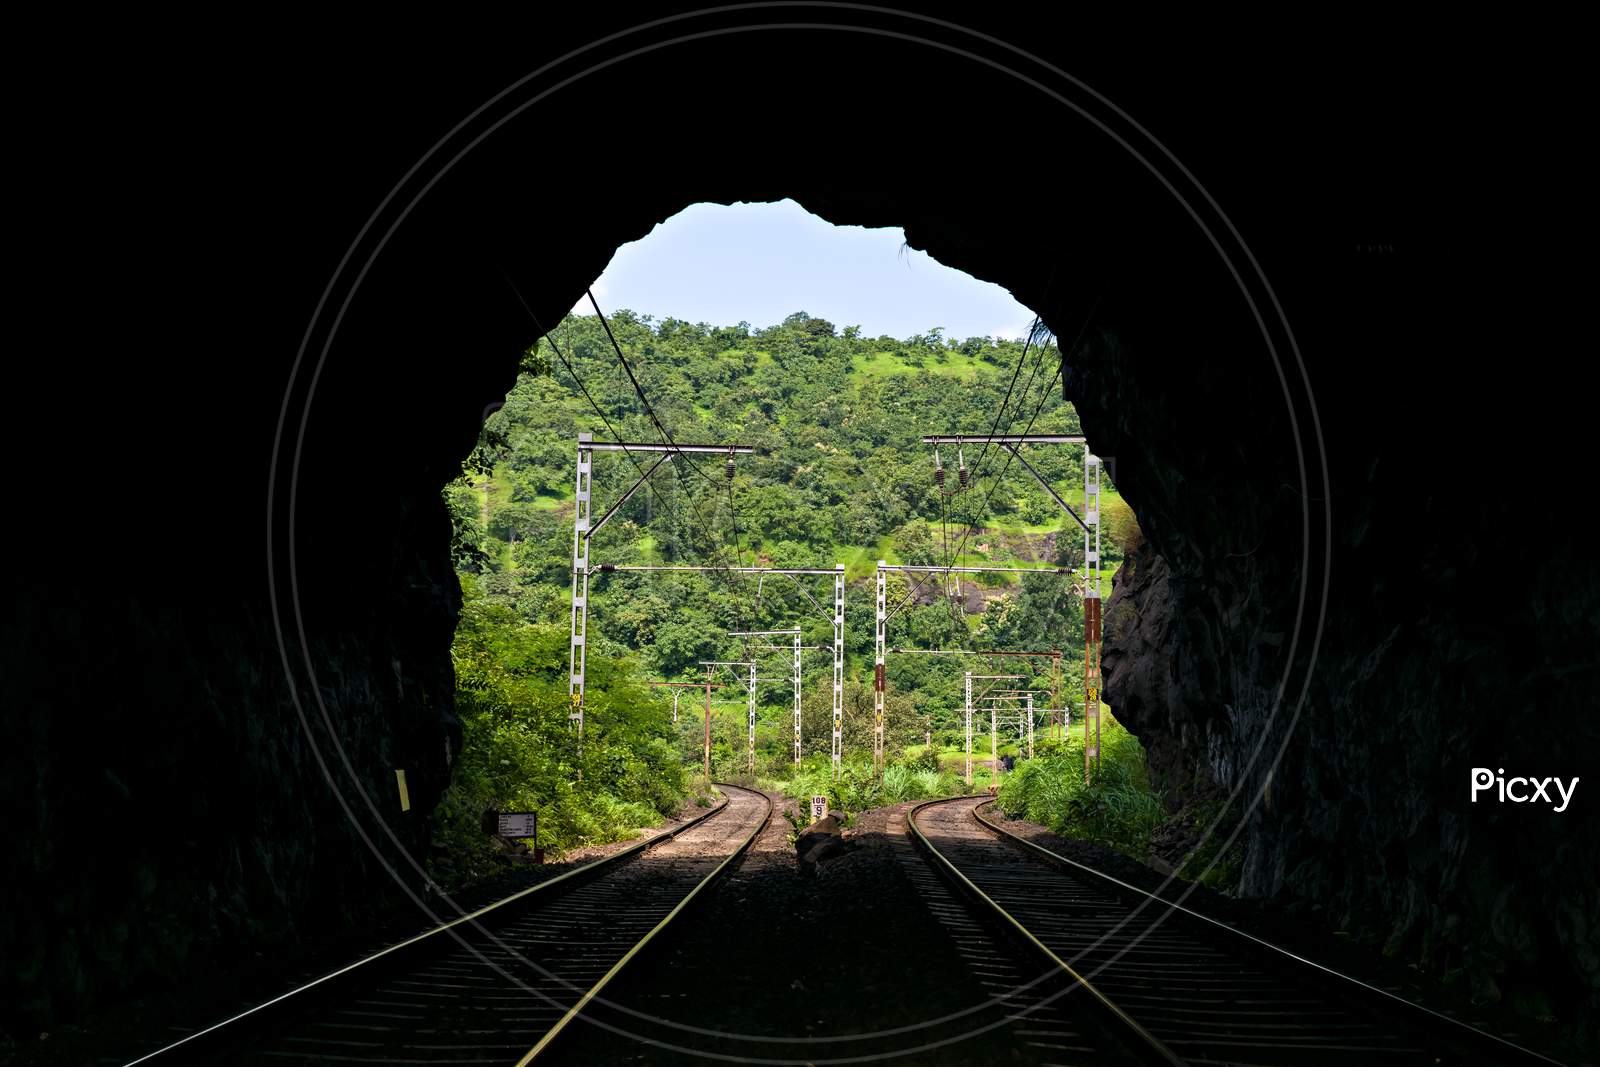 View Through A Railway Tunnel With Two Diverging Routes Ahead.